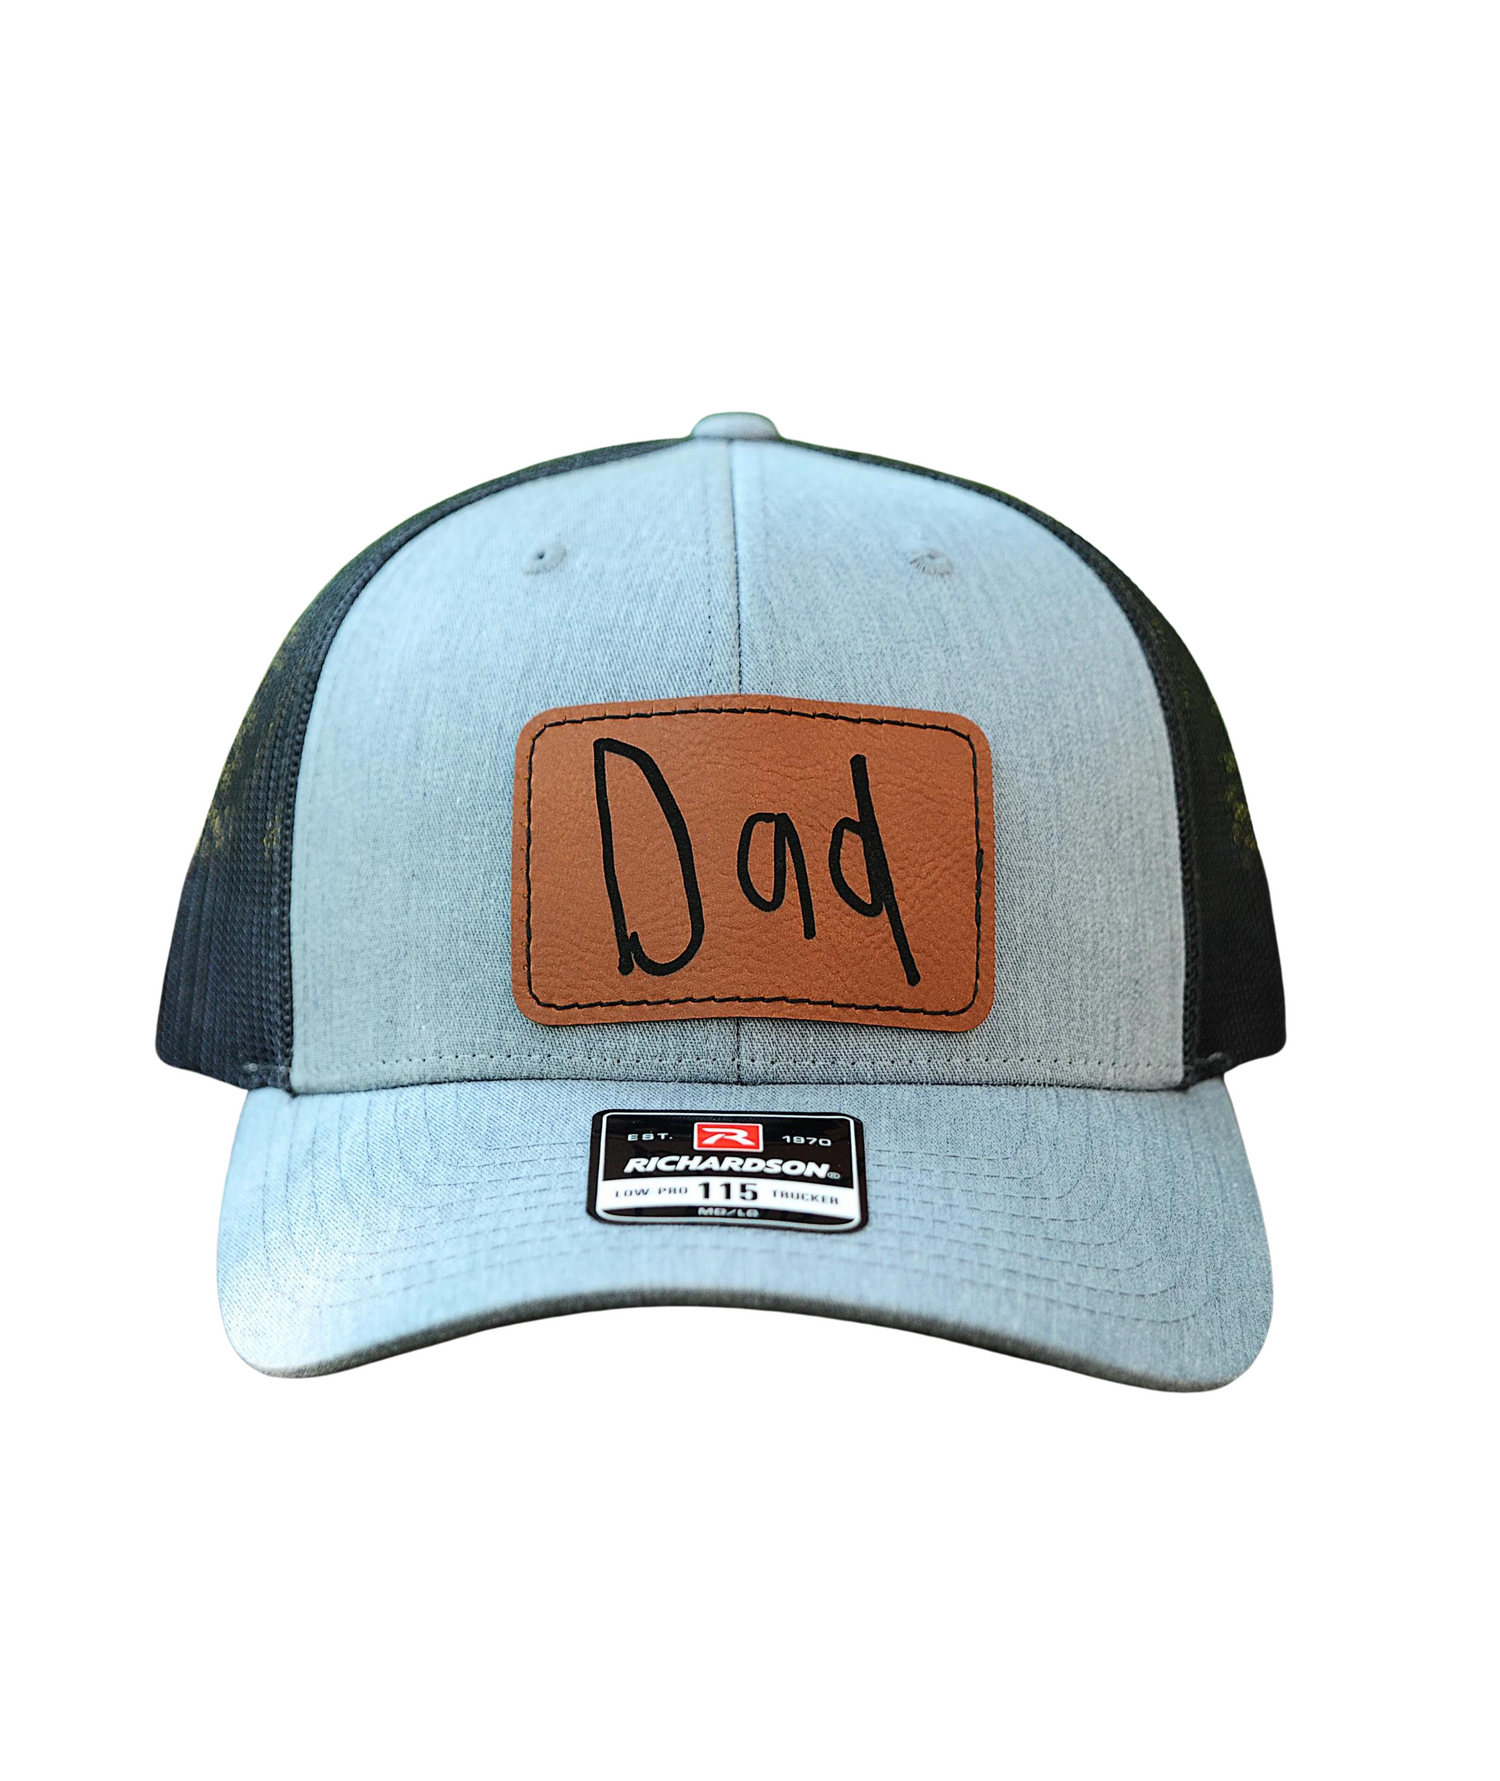 DAD'S DAY HATS